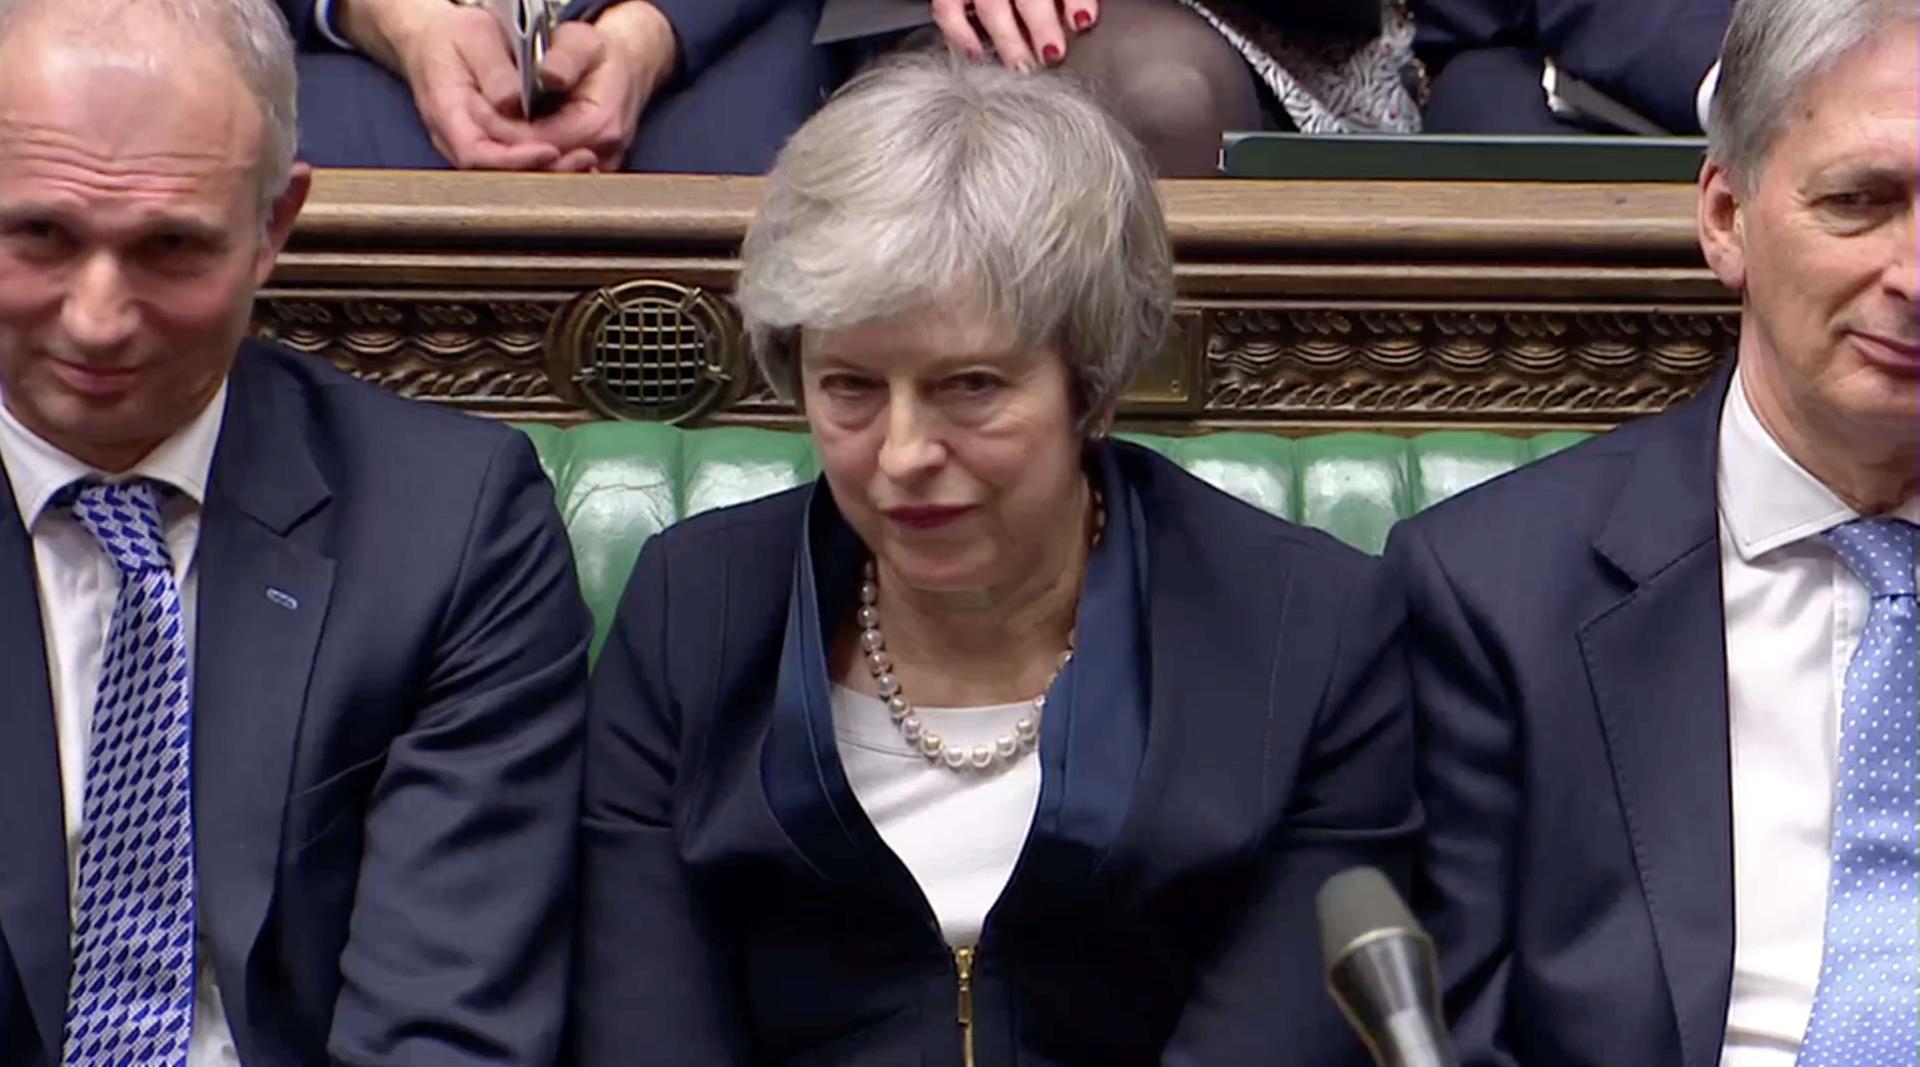 Prime Minister Theresa May sits down in Parliament with a grimace on her face